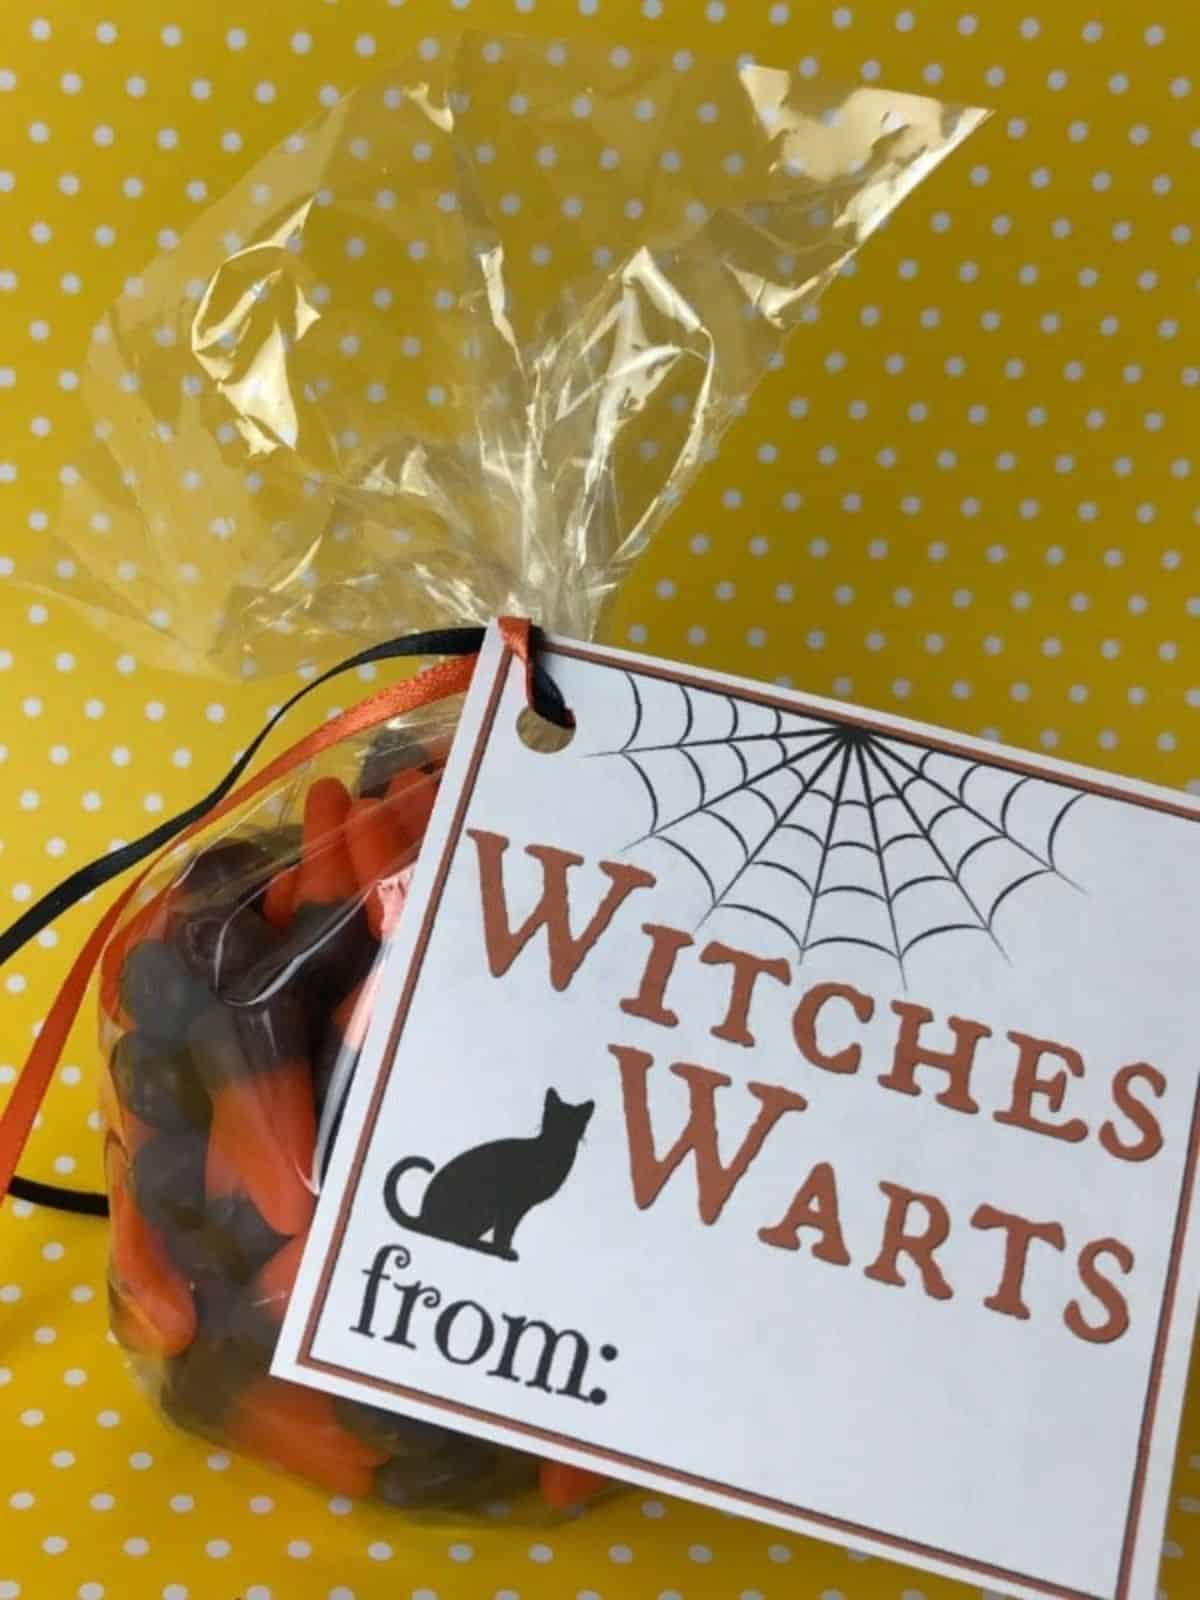 Halloween treat bag with witches warts tag.